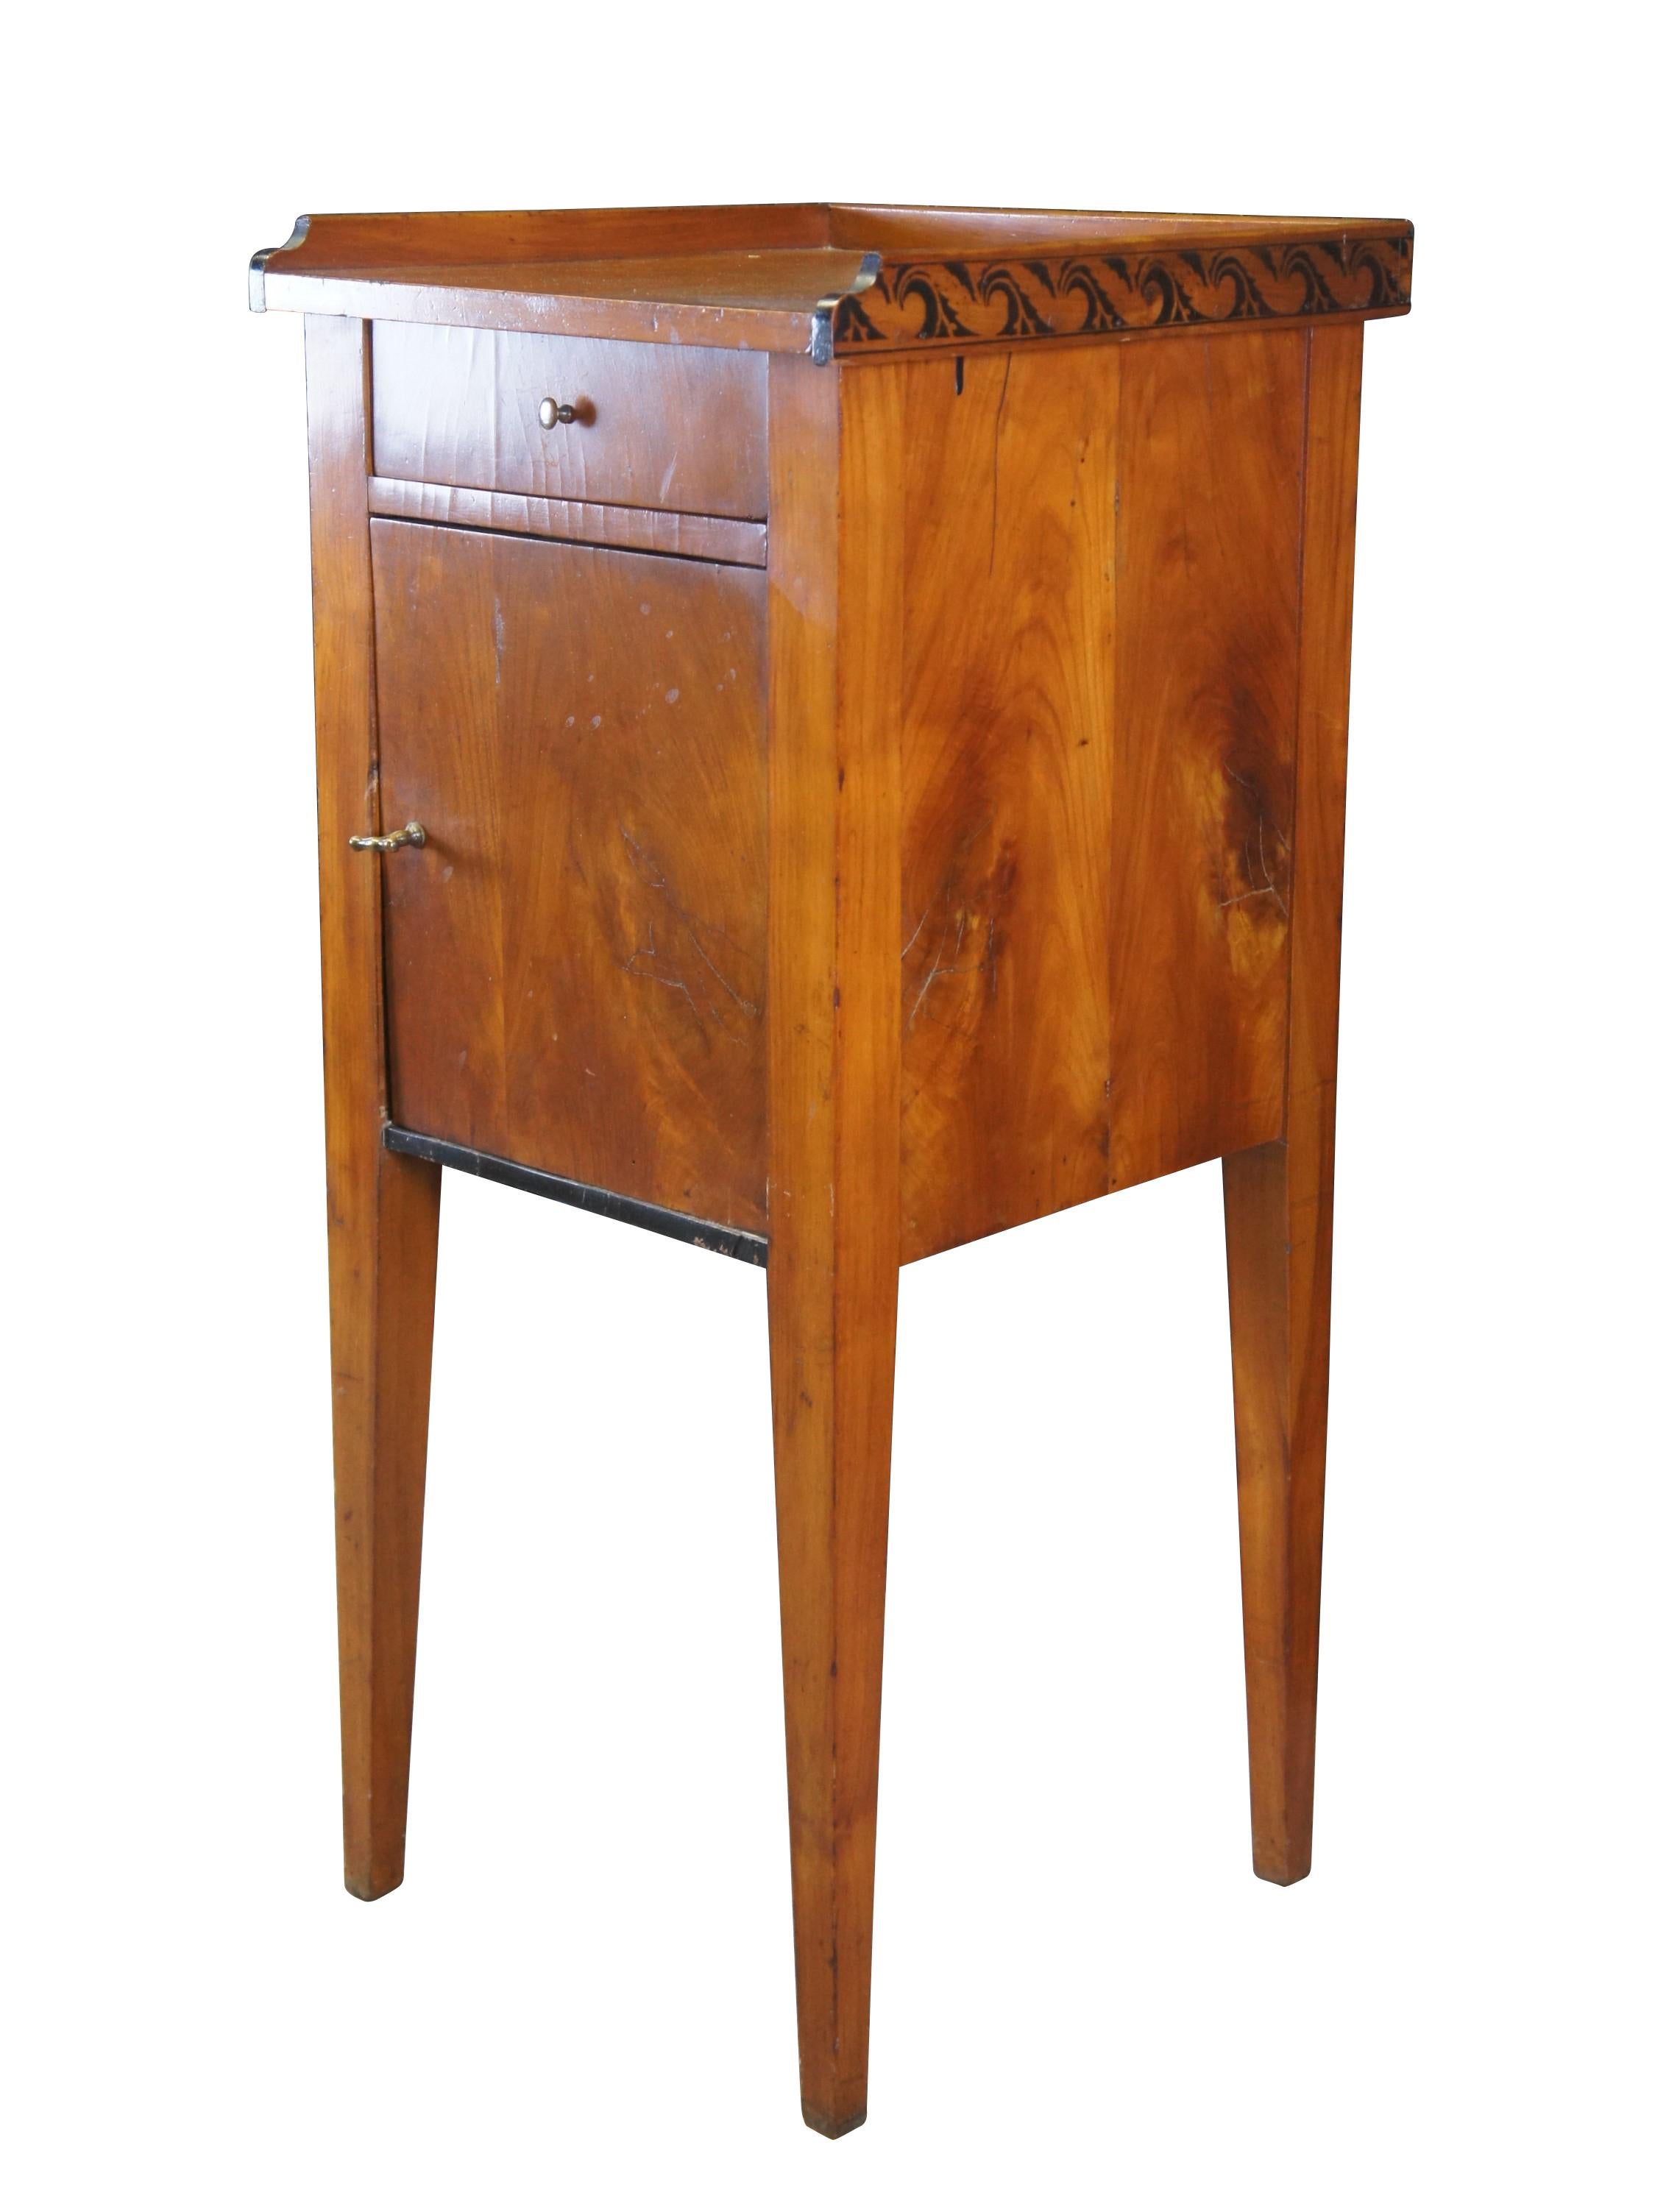 Antique German Biedermeier pillar cabinet or stand.  Made of cherry featuring upper gallery with wavecrest design over one drawer and cabinet, supported by tapered legs.  Circa mid to early 19th century.

Dimensions:
15.75